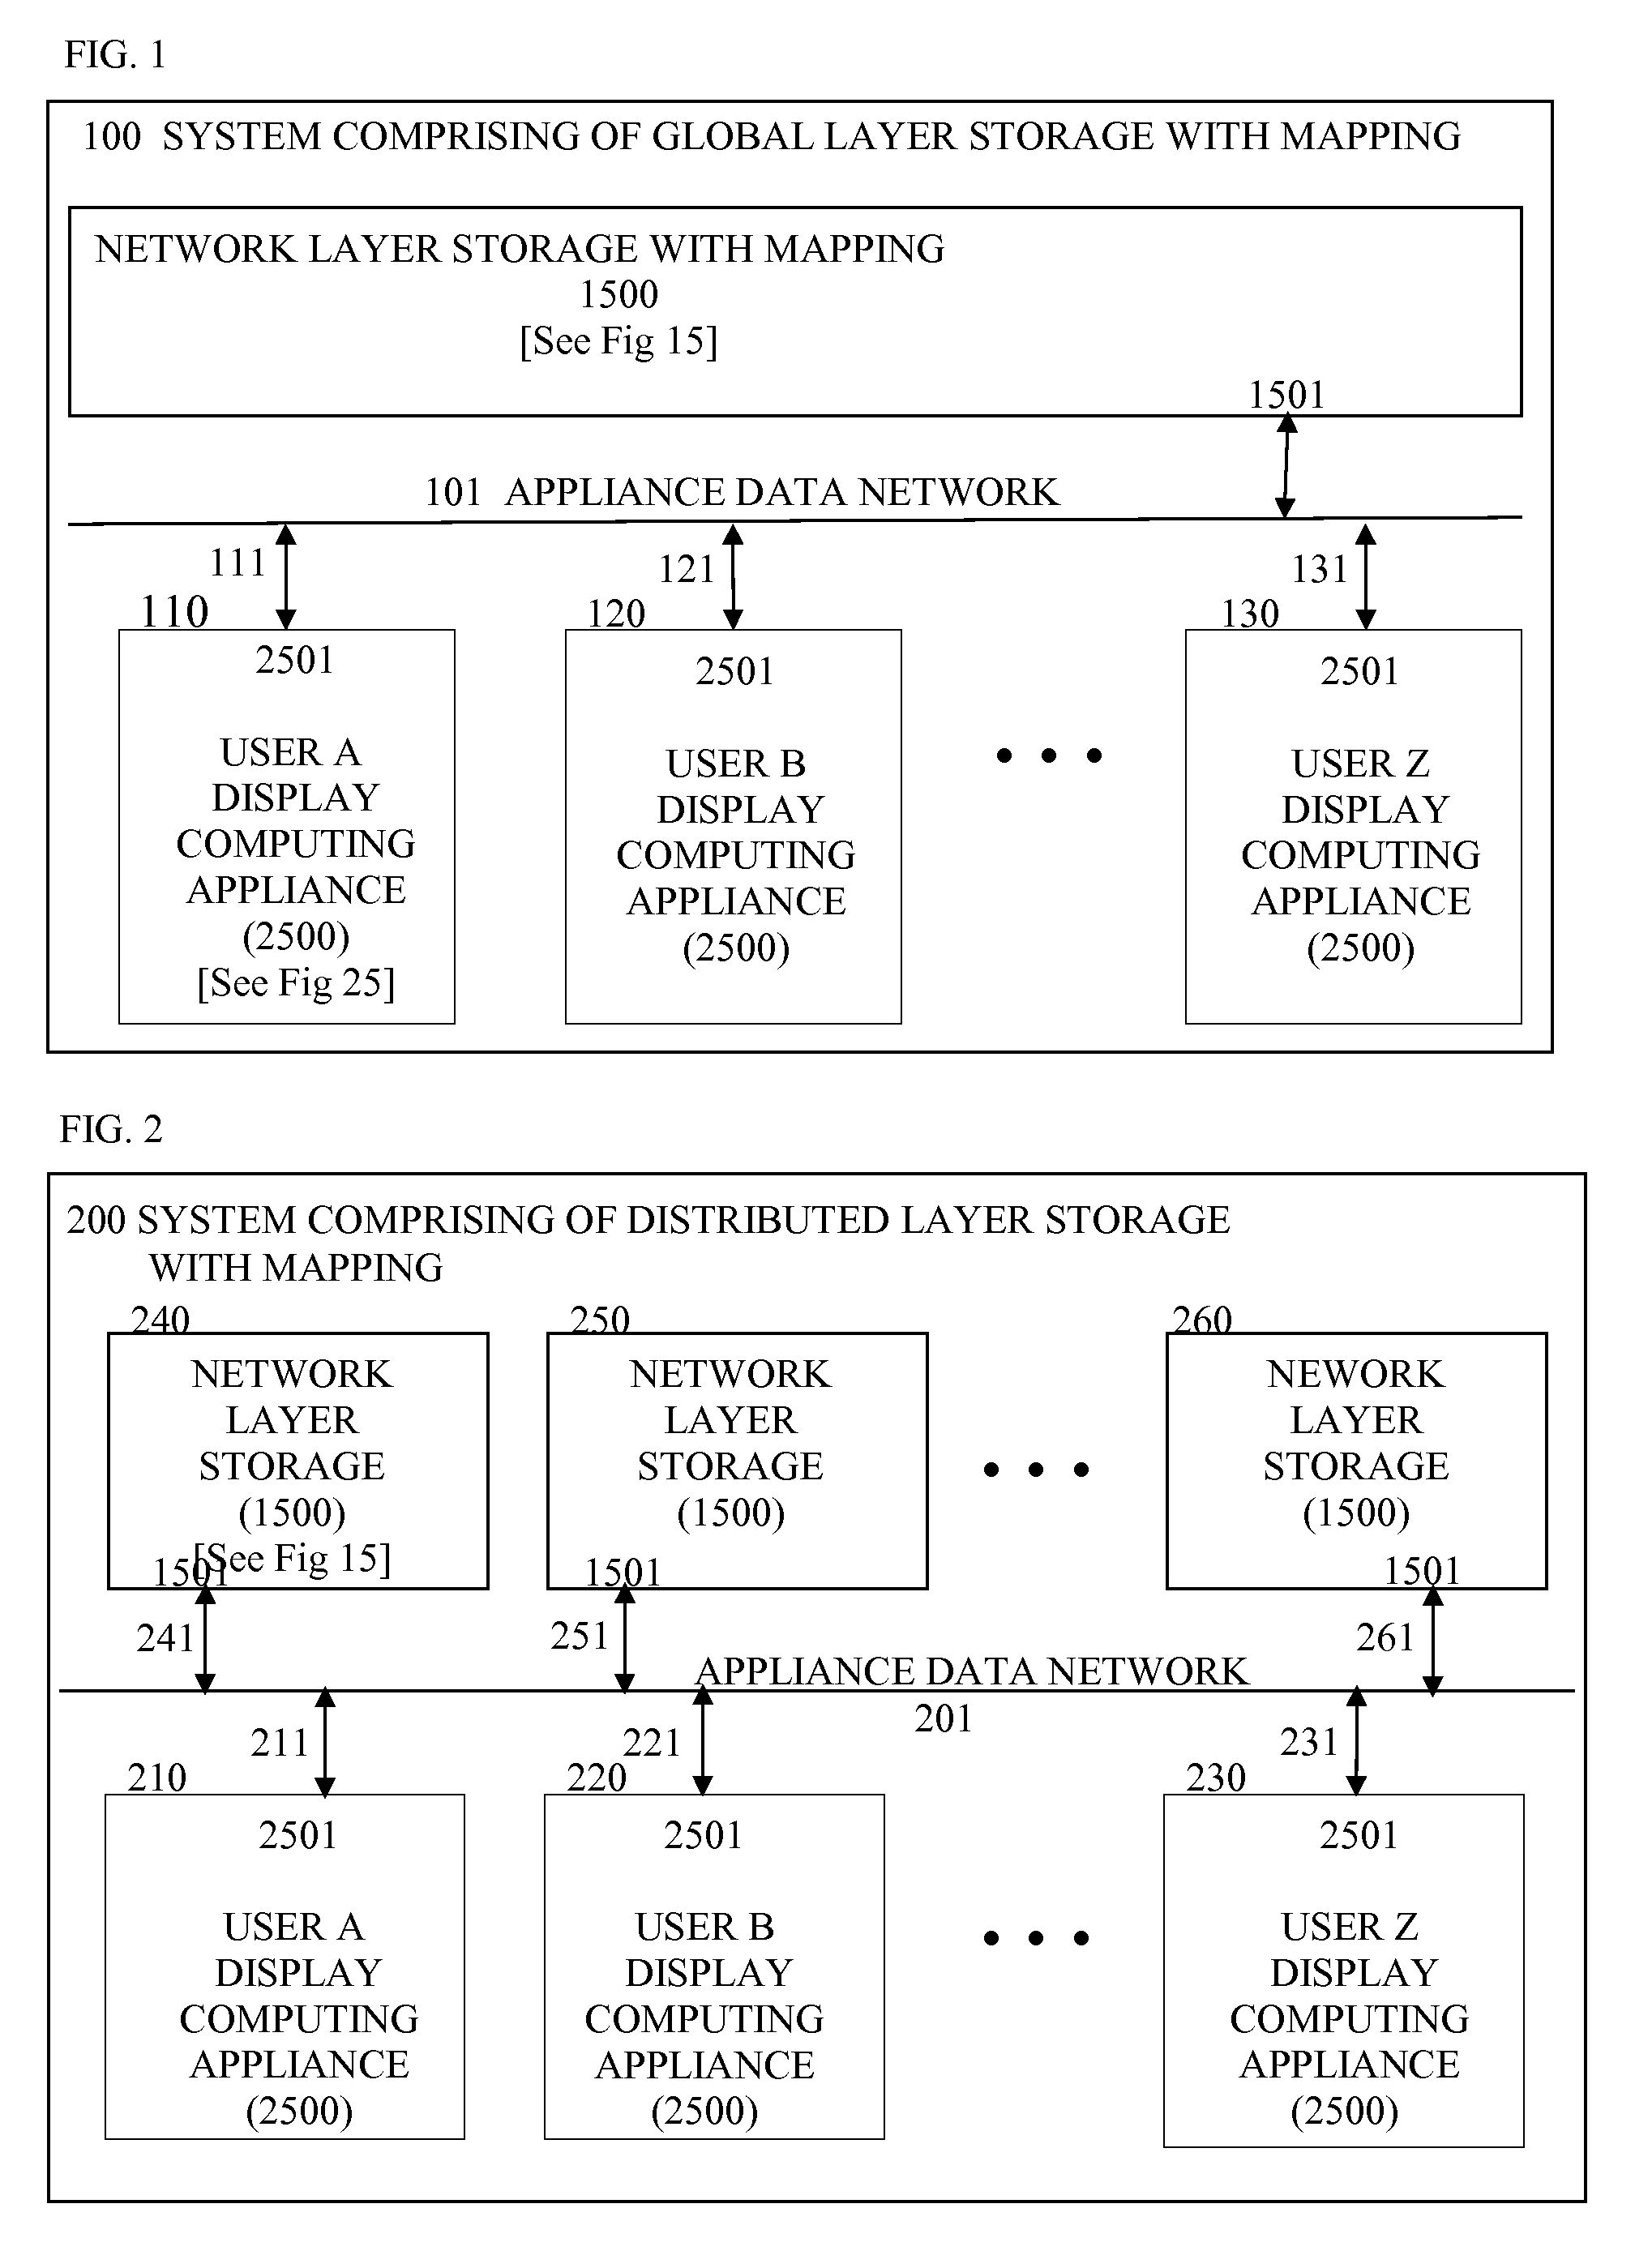 Systems and methods providing collaborating among a plurality of users each at a respective computing appliance, and providing storage in respective data layers of respective user data, provided responsive to a respective user input, and utilizing event processing of event content stored in the data layers